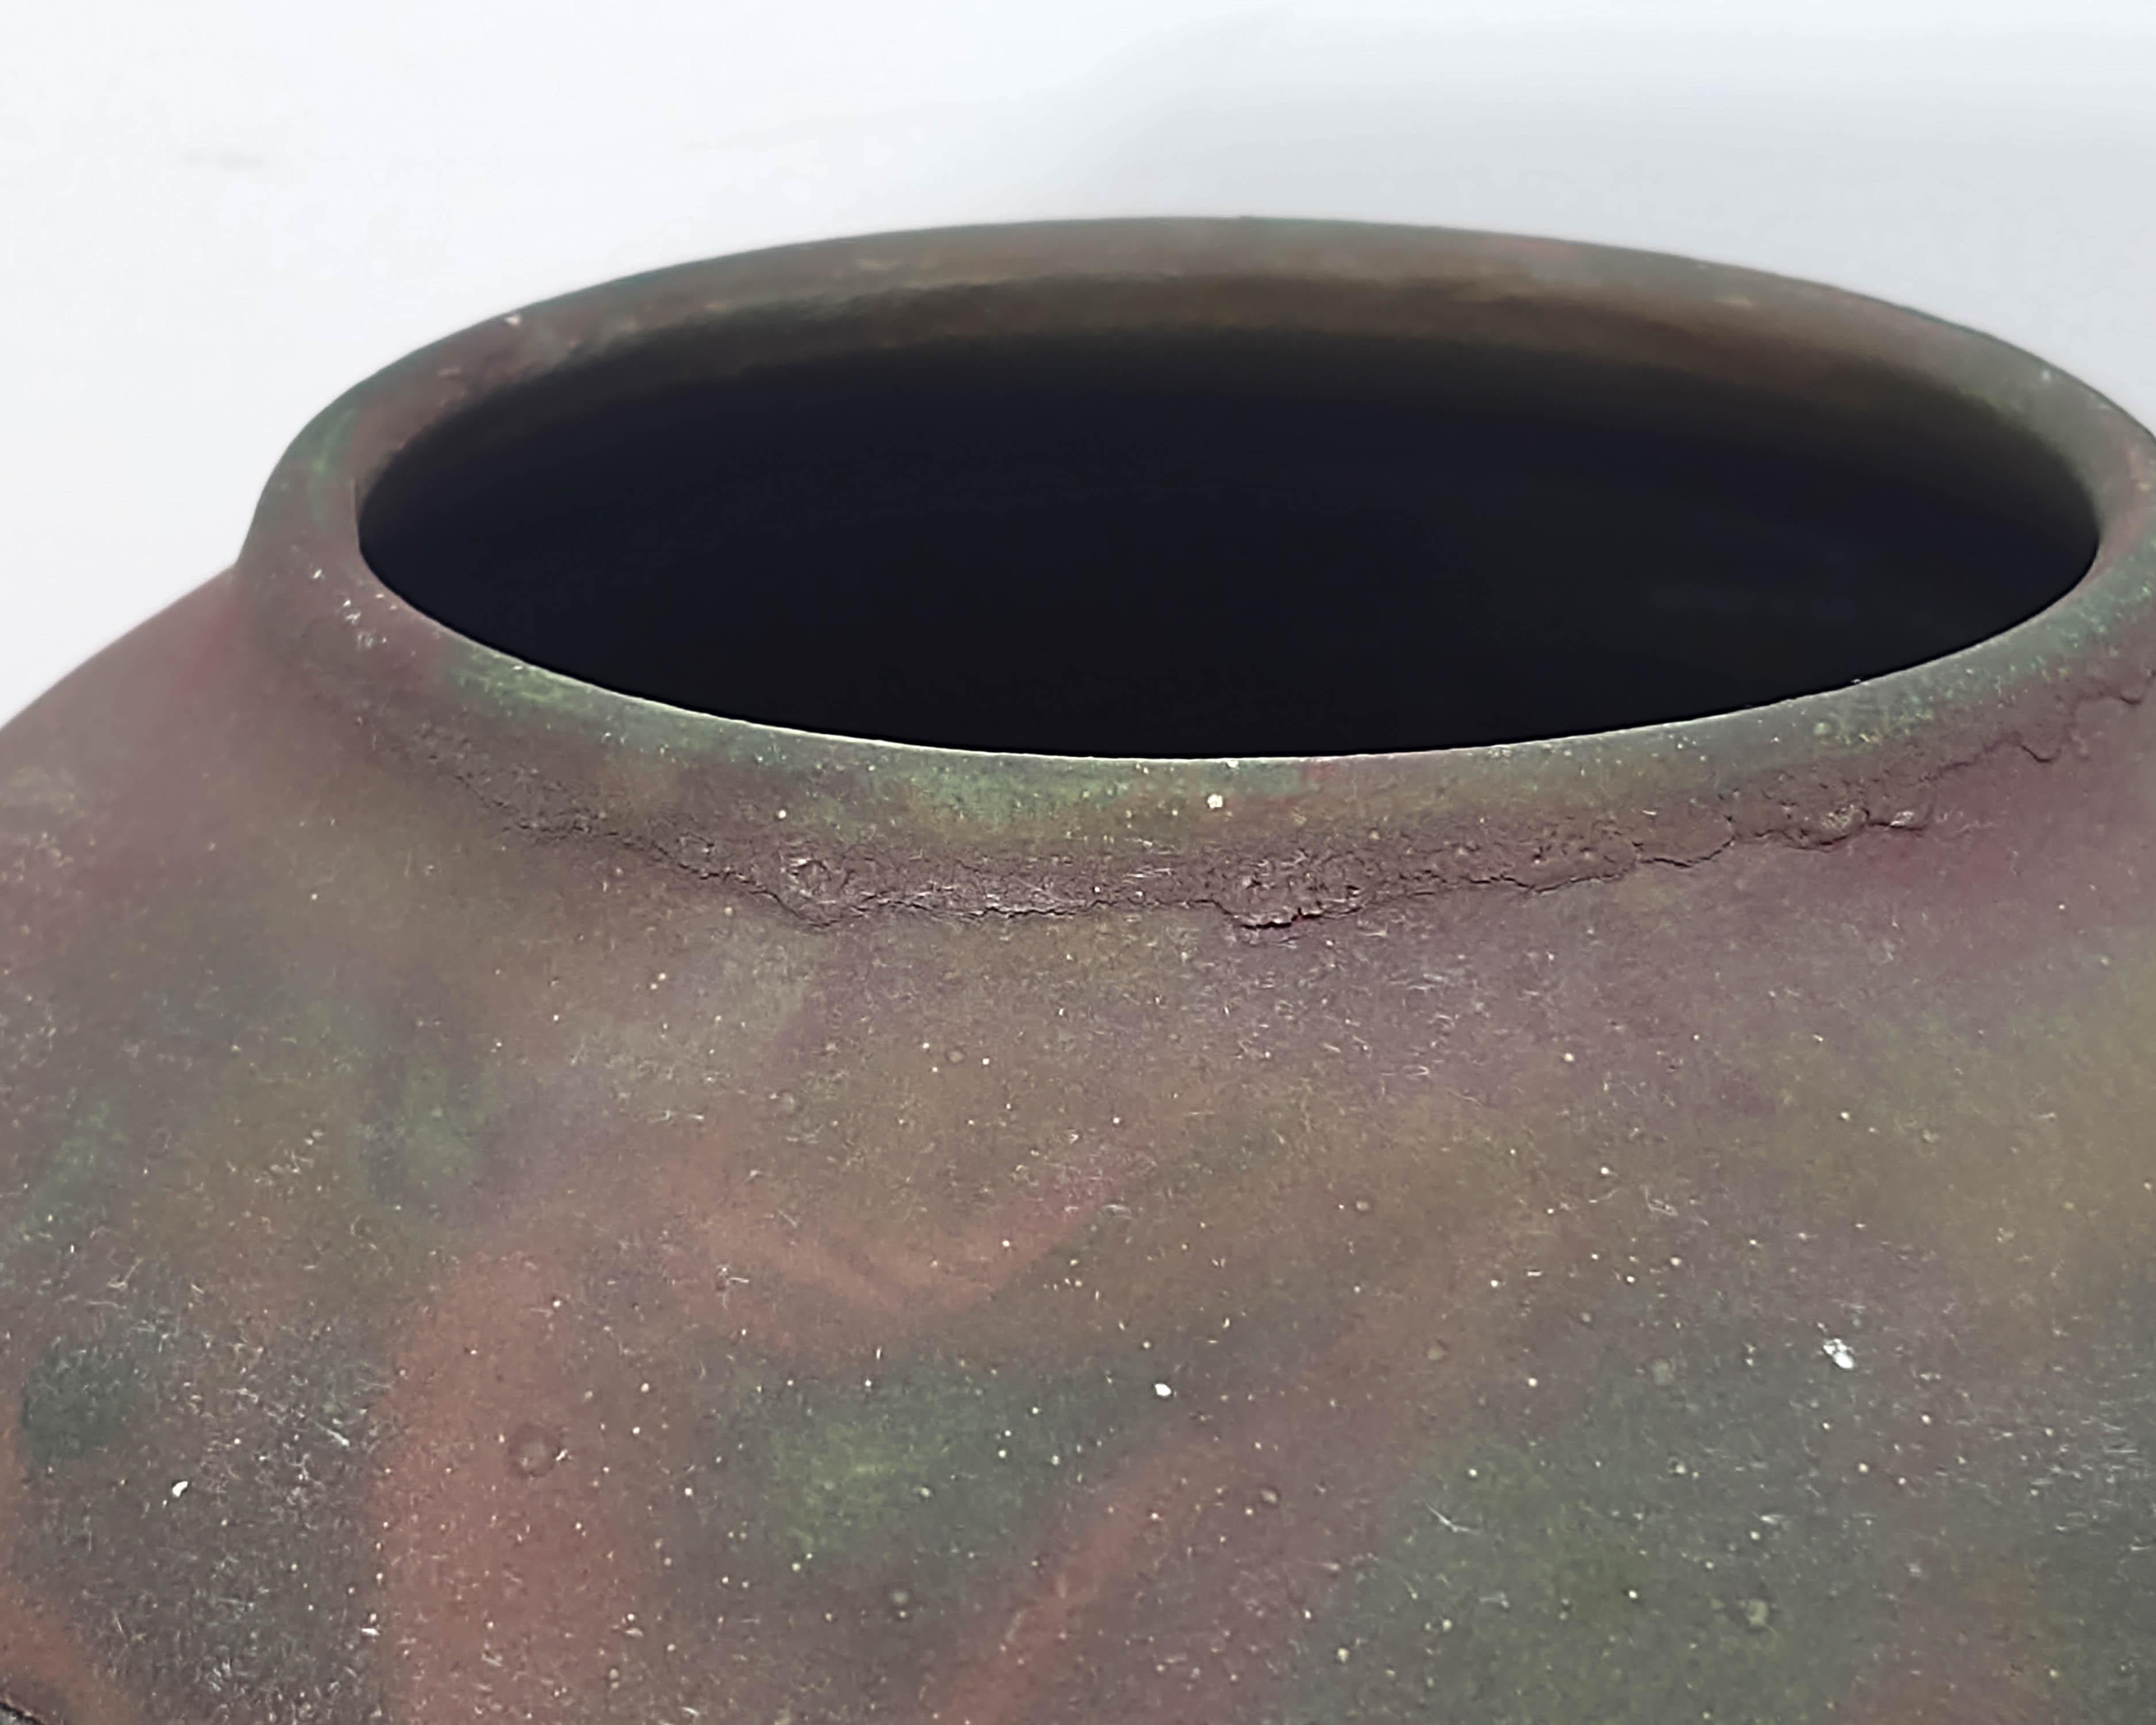 1980s Raku Fired Iridescent Black Earthenware Pottery Vessel In Good Condition For Sale In Hawthorne, CA